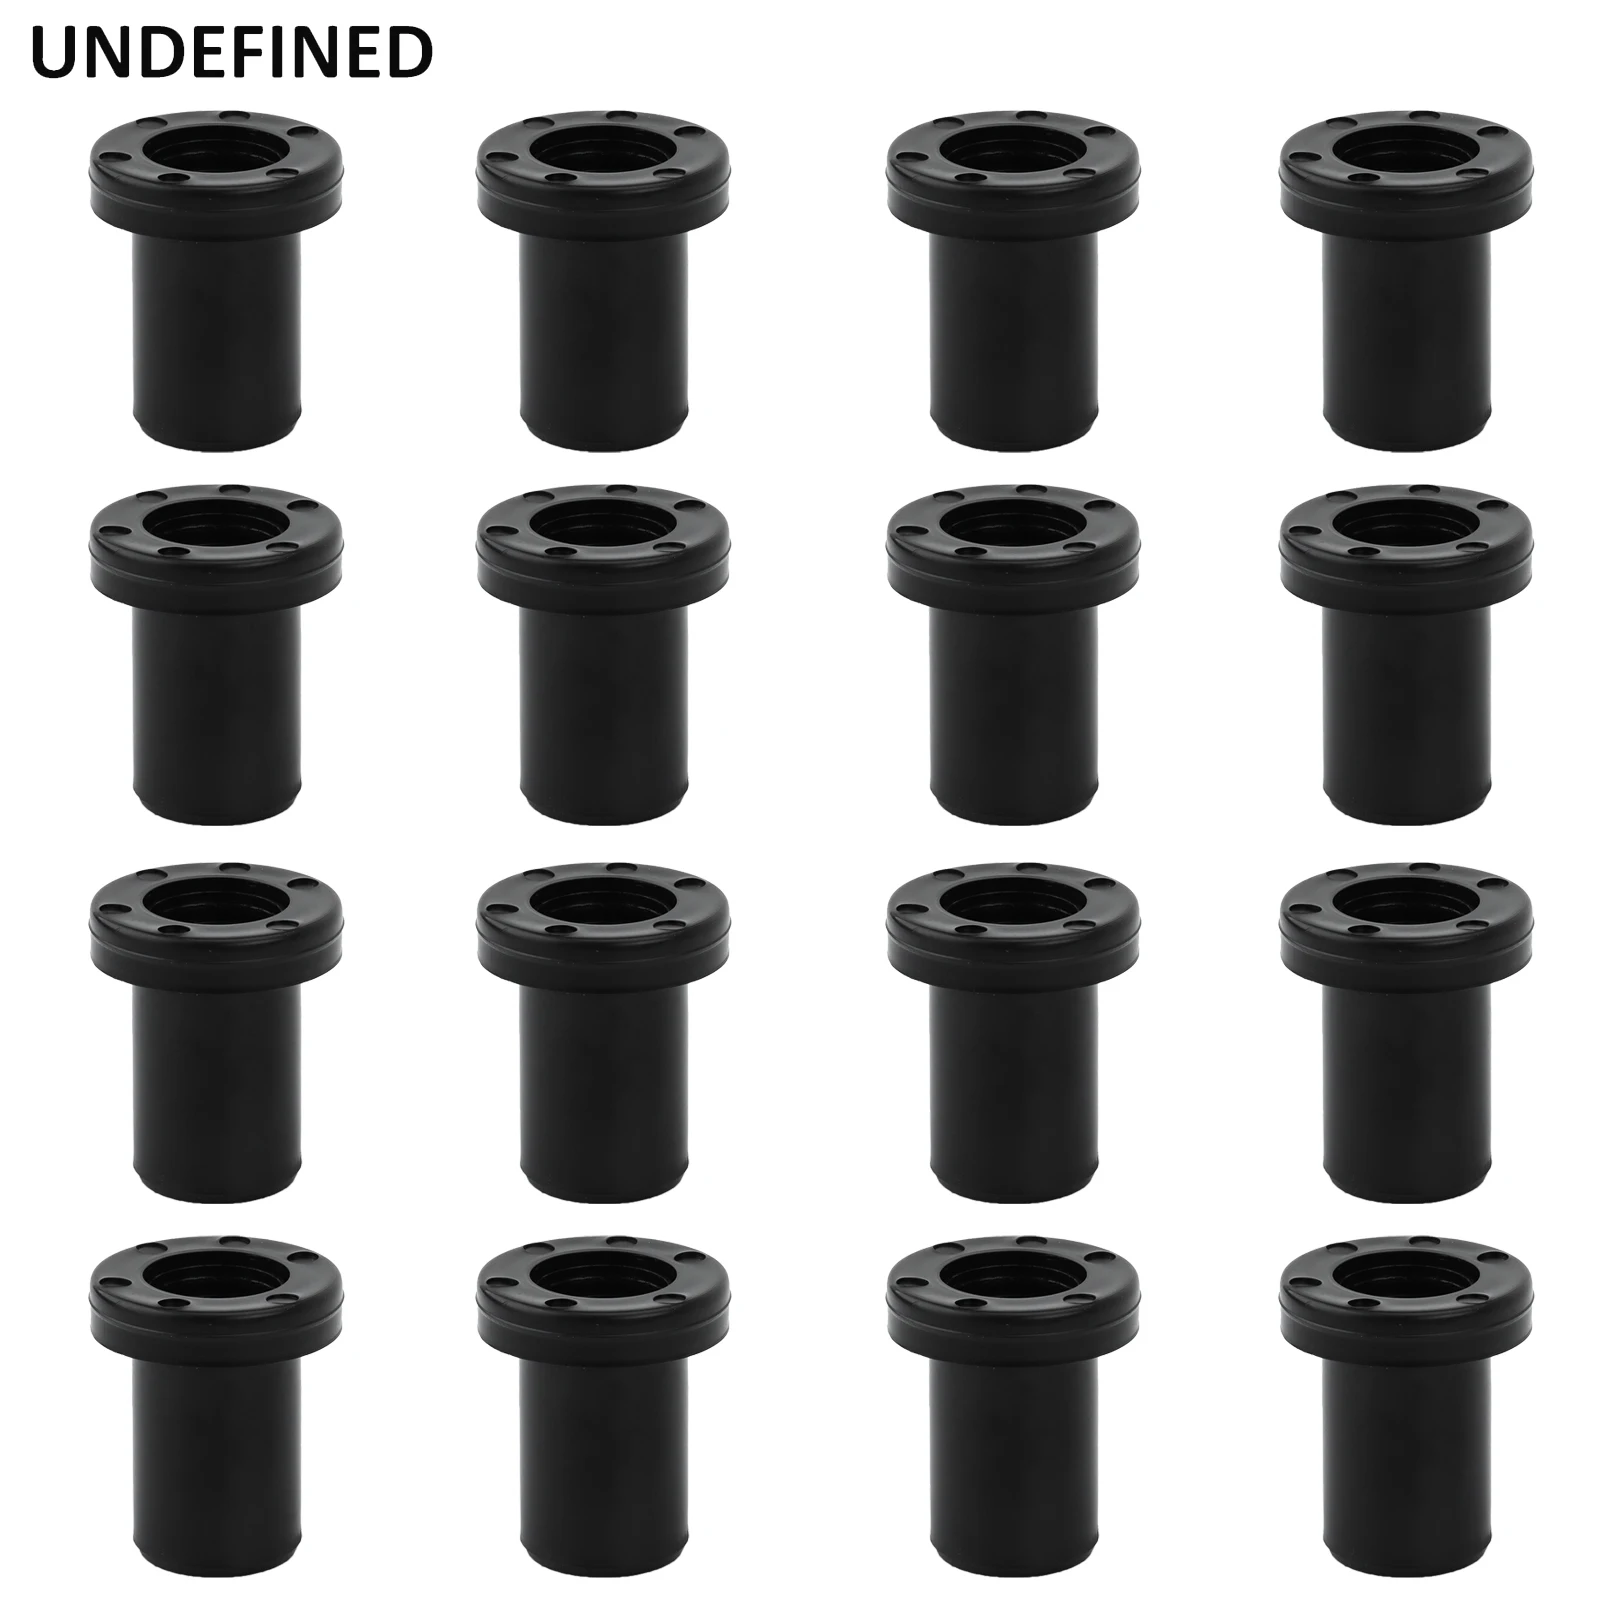 REAR SUSPENSION SHOCK ABSORBER BUSHINGS Fits ARCTIC CAT PROWLER 550 4X4 2009 